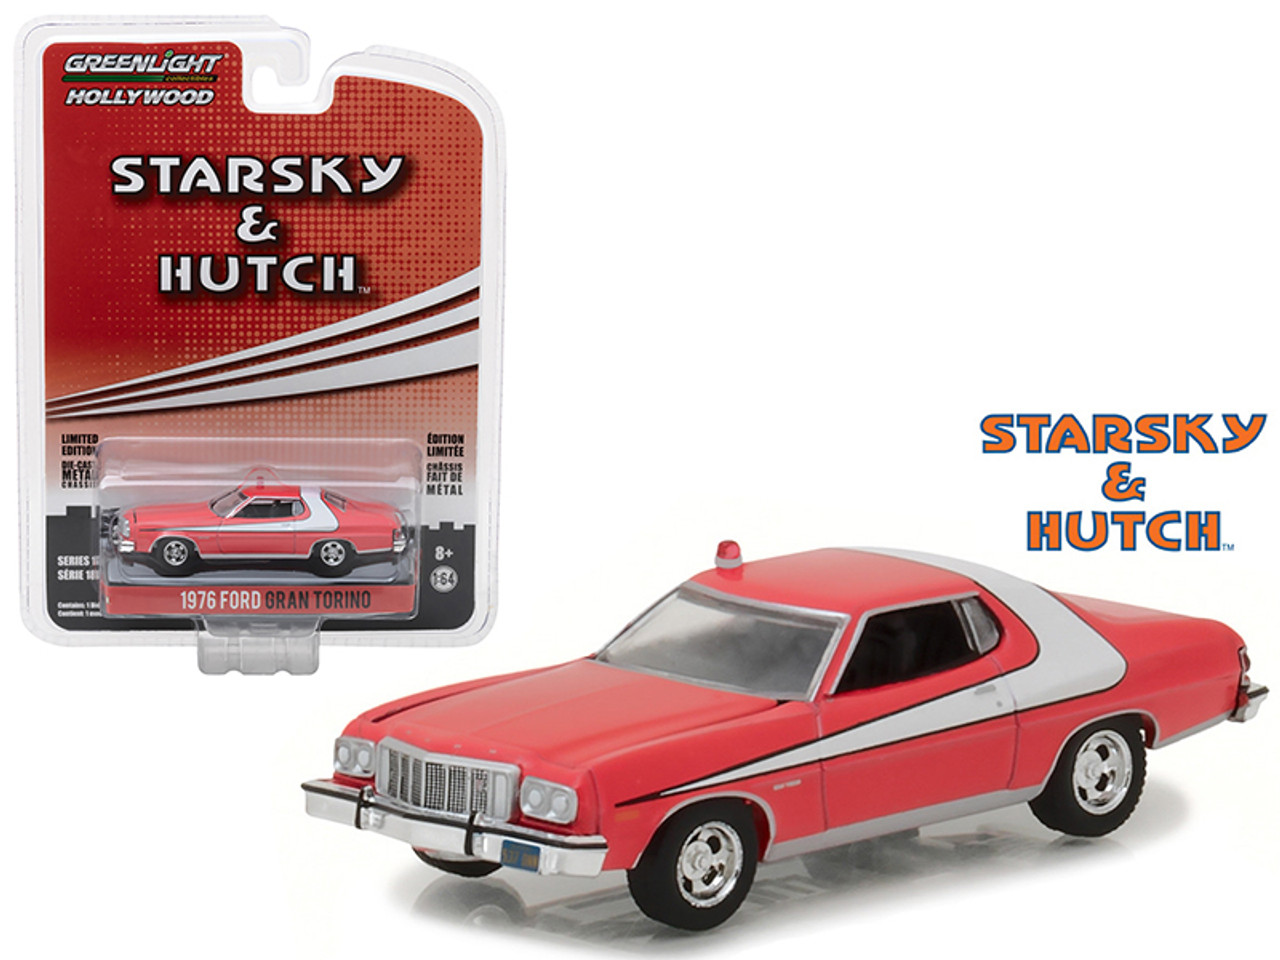 1976 Ford Gran Torino Starsky and Hutch (1975-1979 TV Series) Hollywood Series 18 1/64 Diecast Model Car by Greenlight